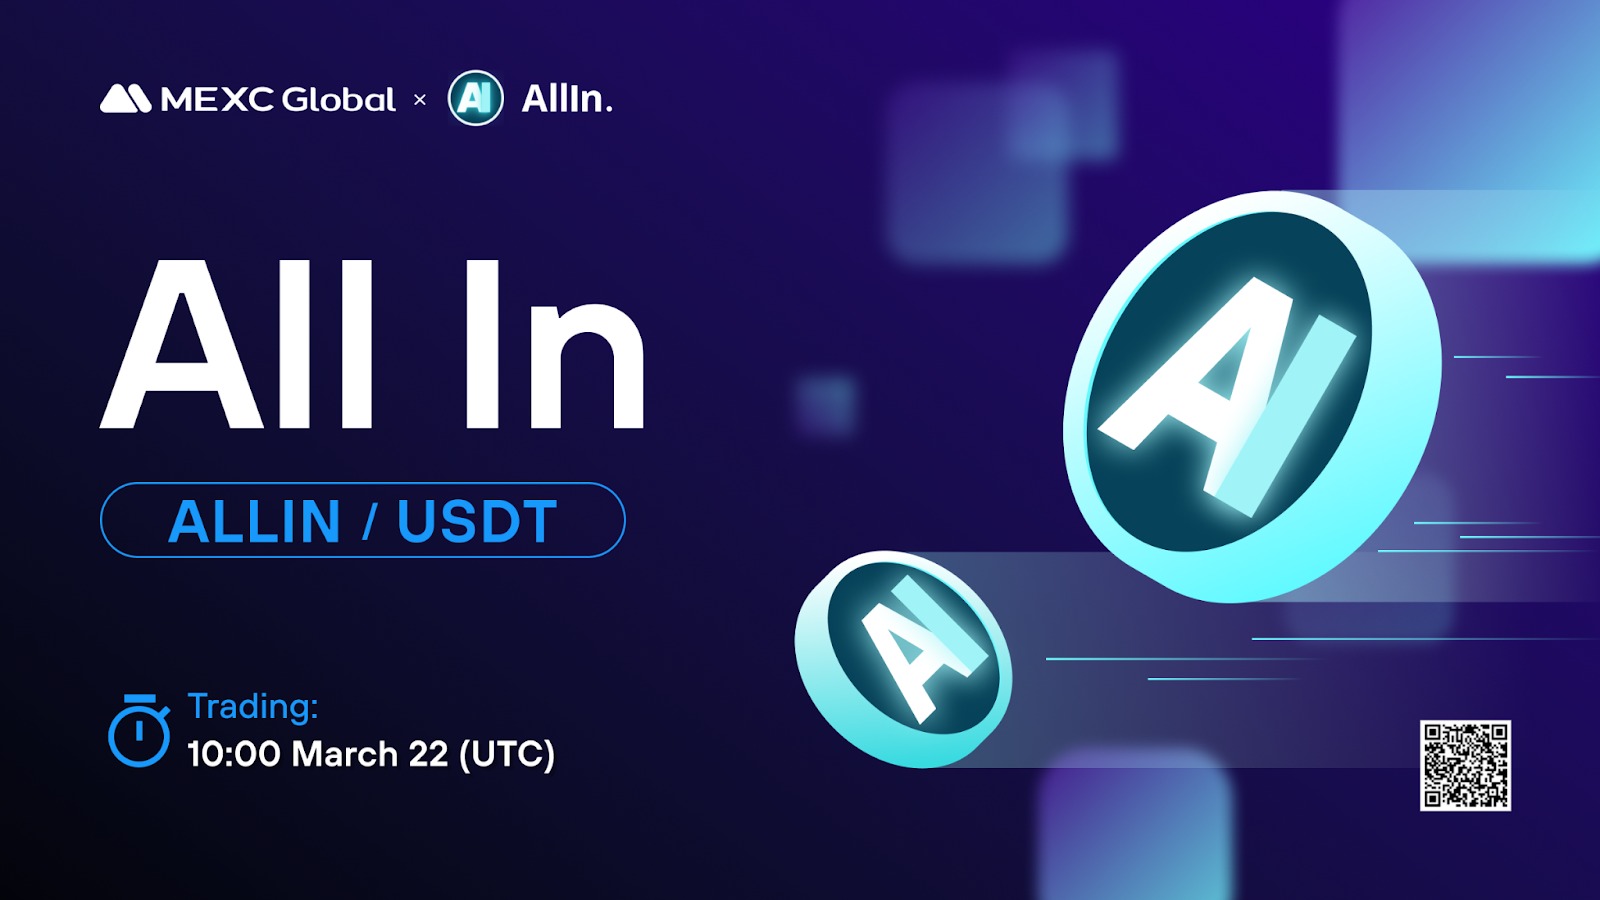 , ALLIN Successfully Concludes Kickstarter Campaign and is Available for Trading on MEXC Global